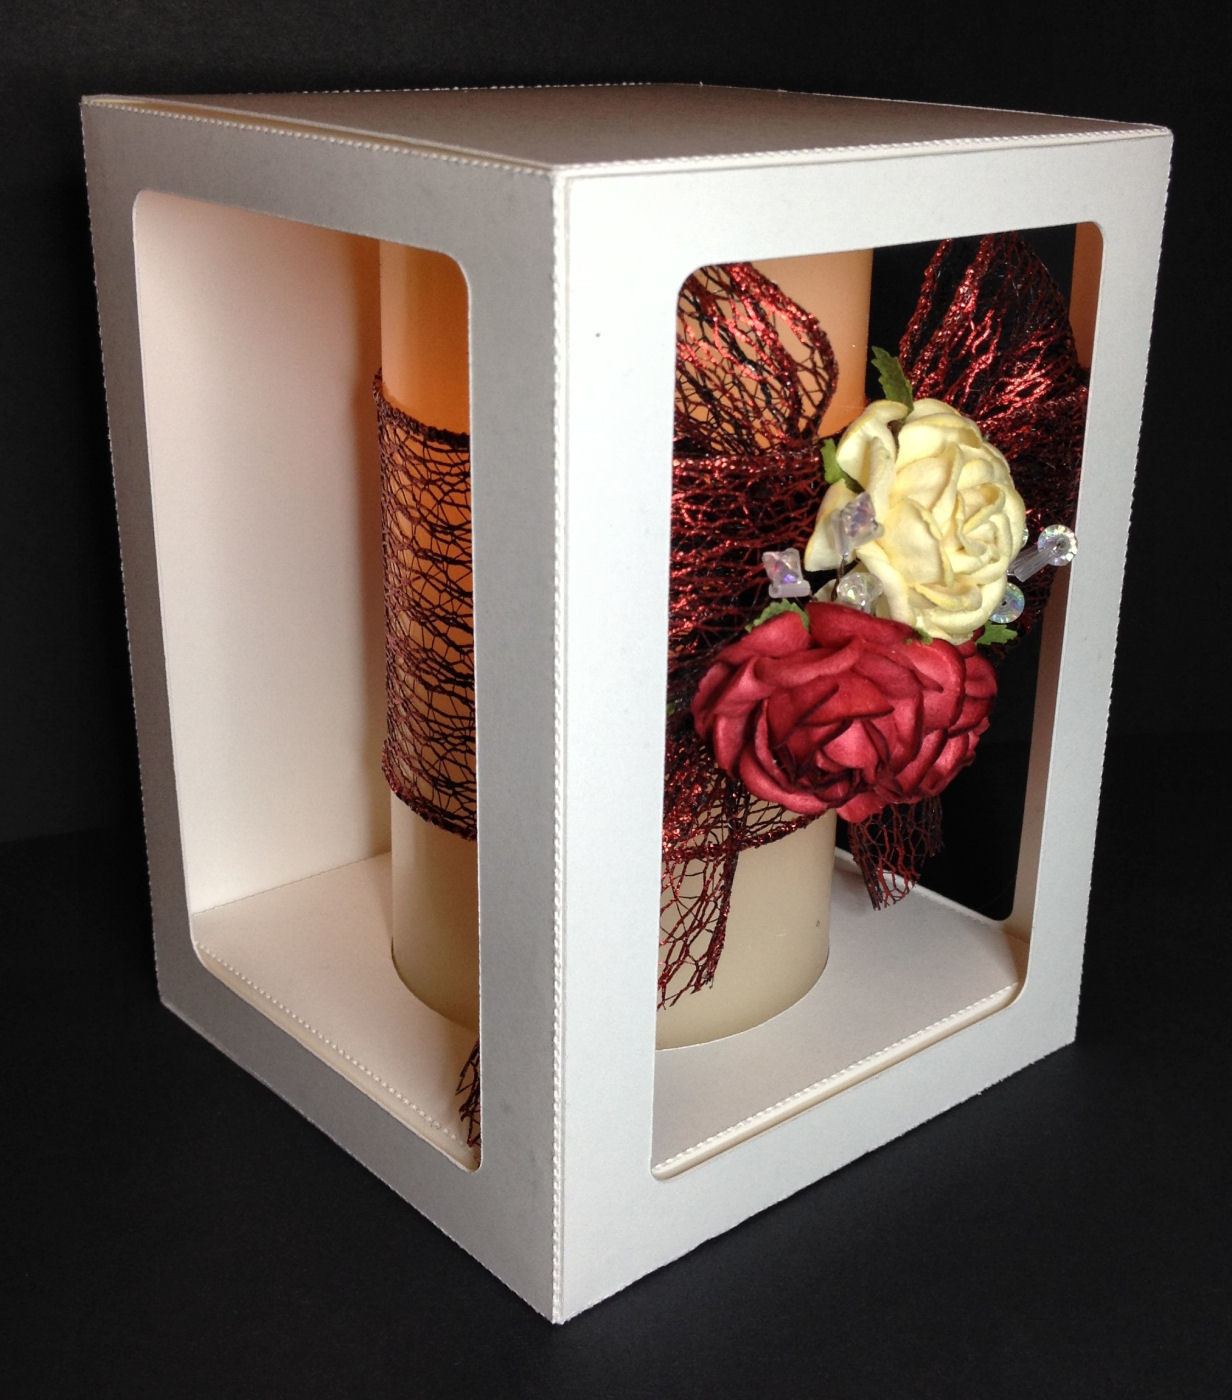 Box 4.5 x 4.5 x 7 inches ideal for pillar candles